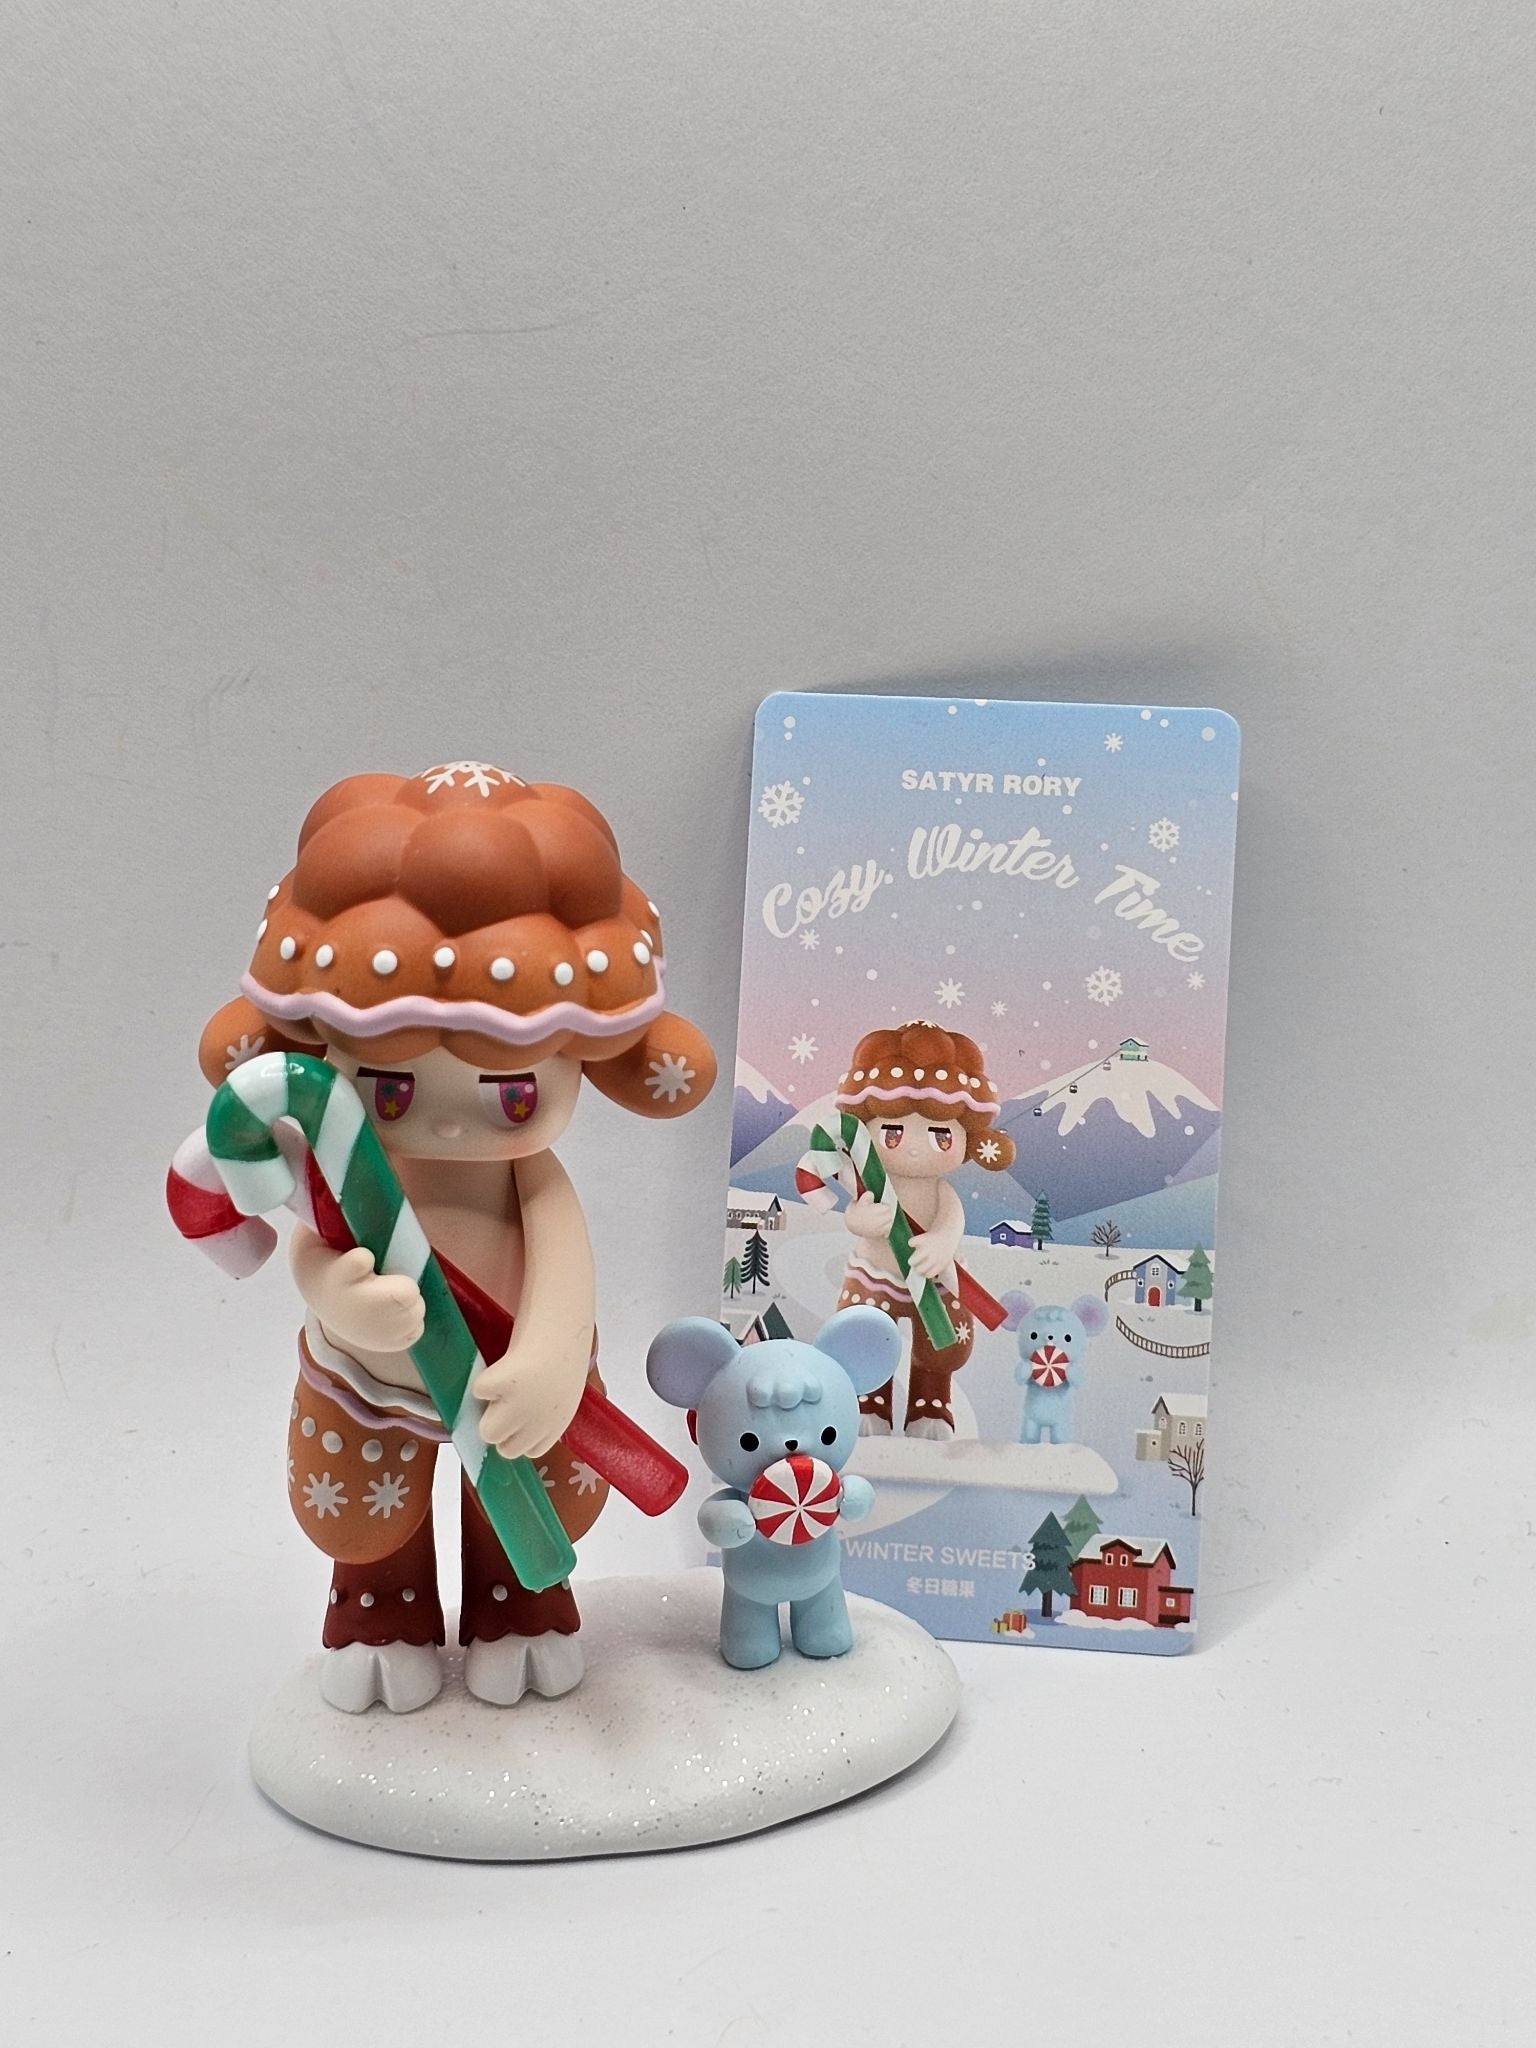 Winter Sweets - Satyr Rory Cozy Winter Time Blind Box Series - Popmart - 1